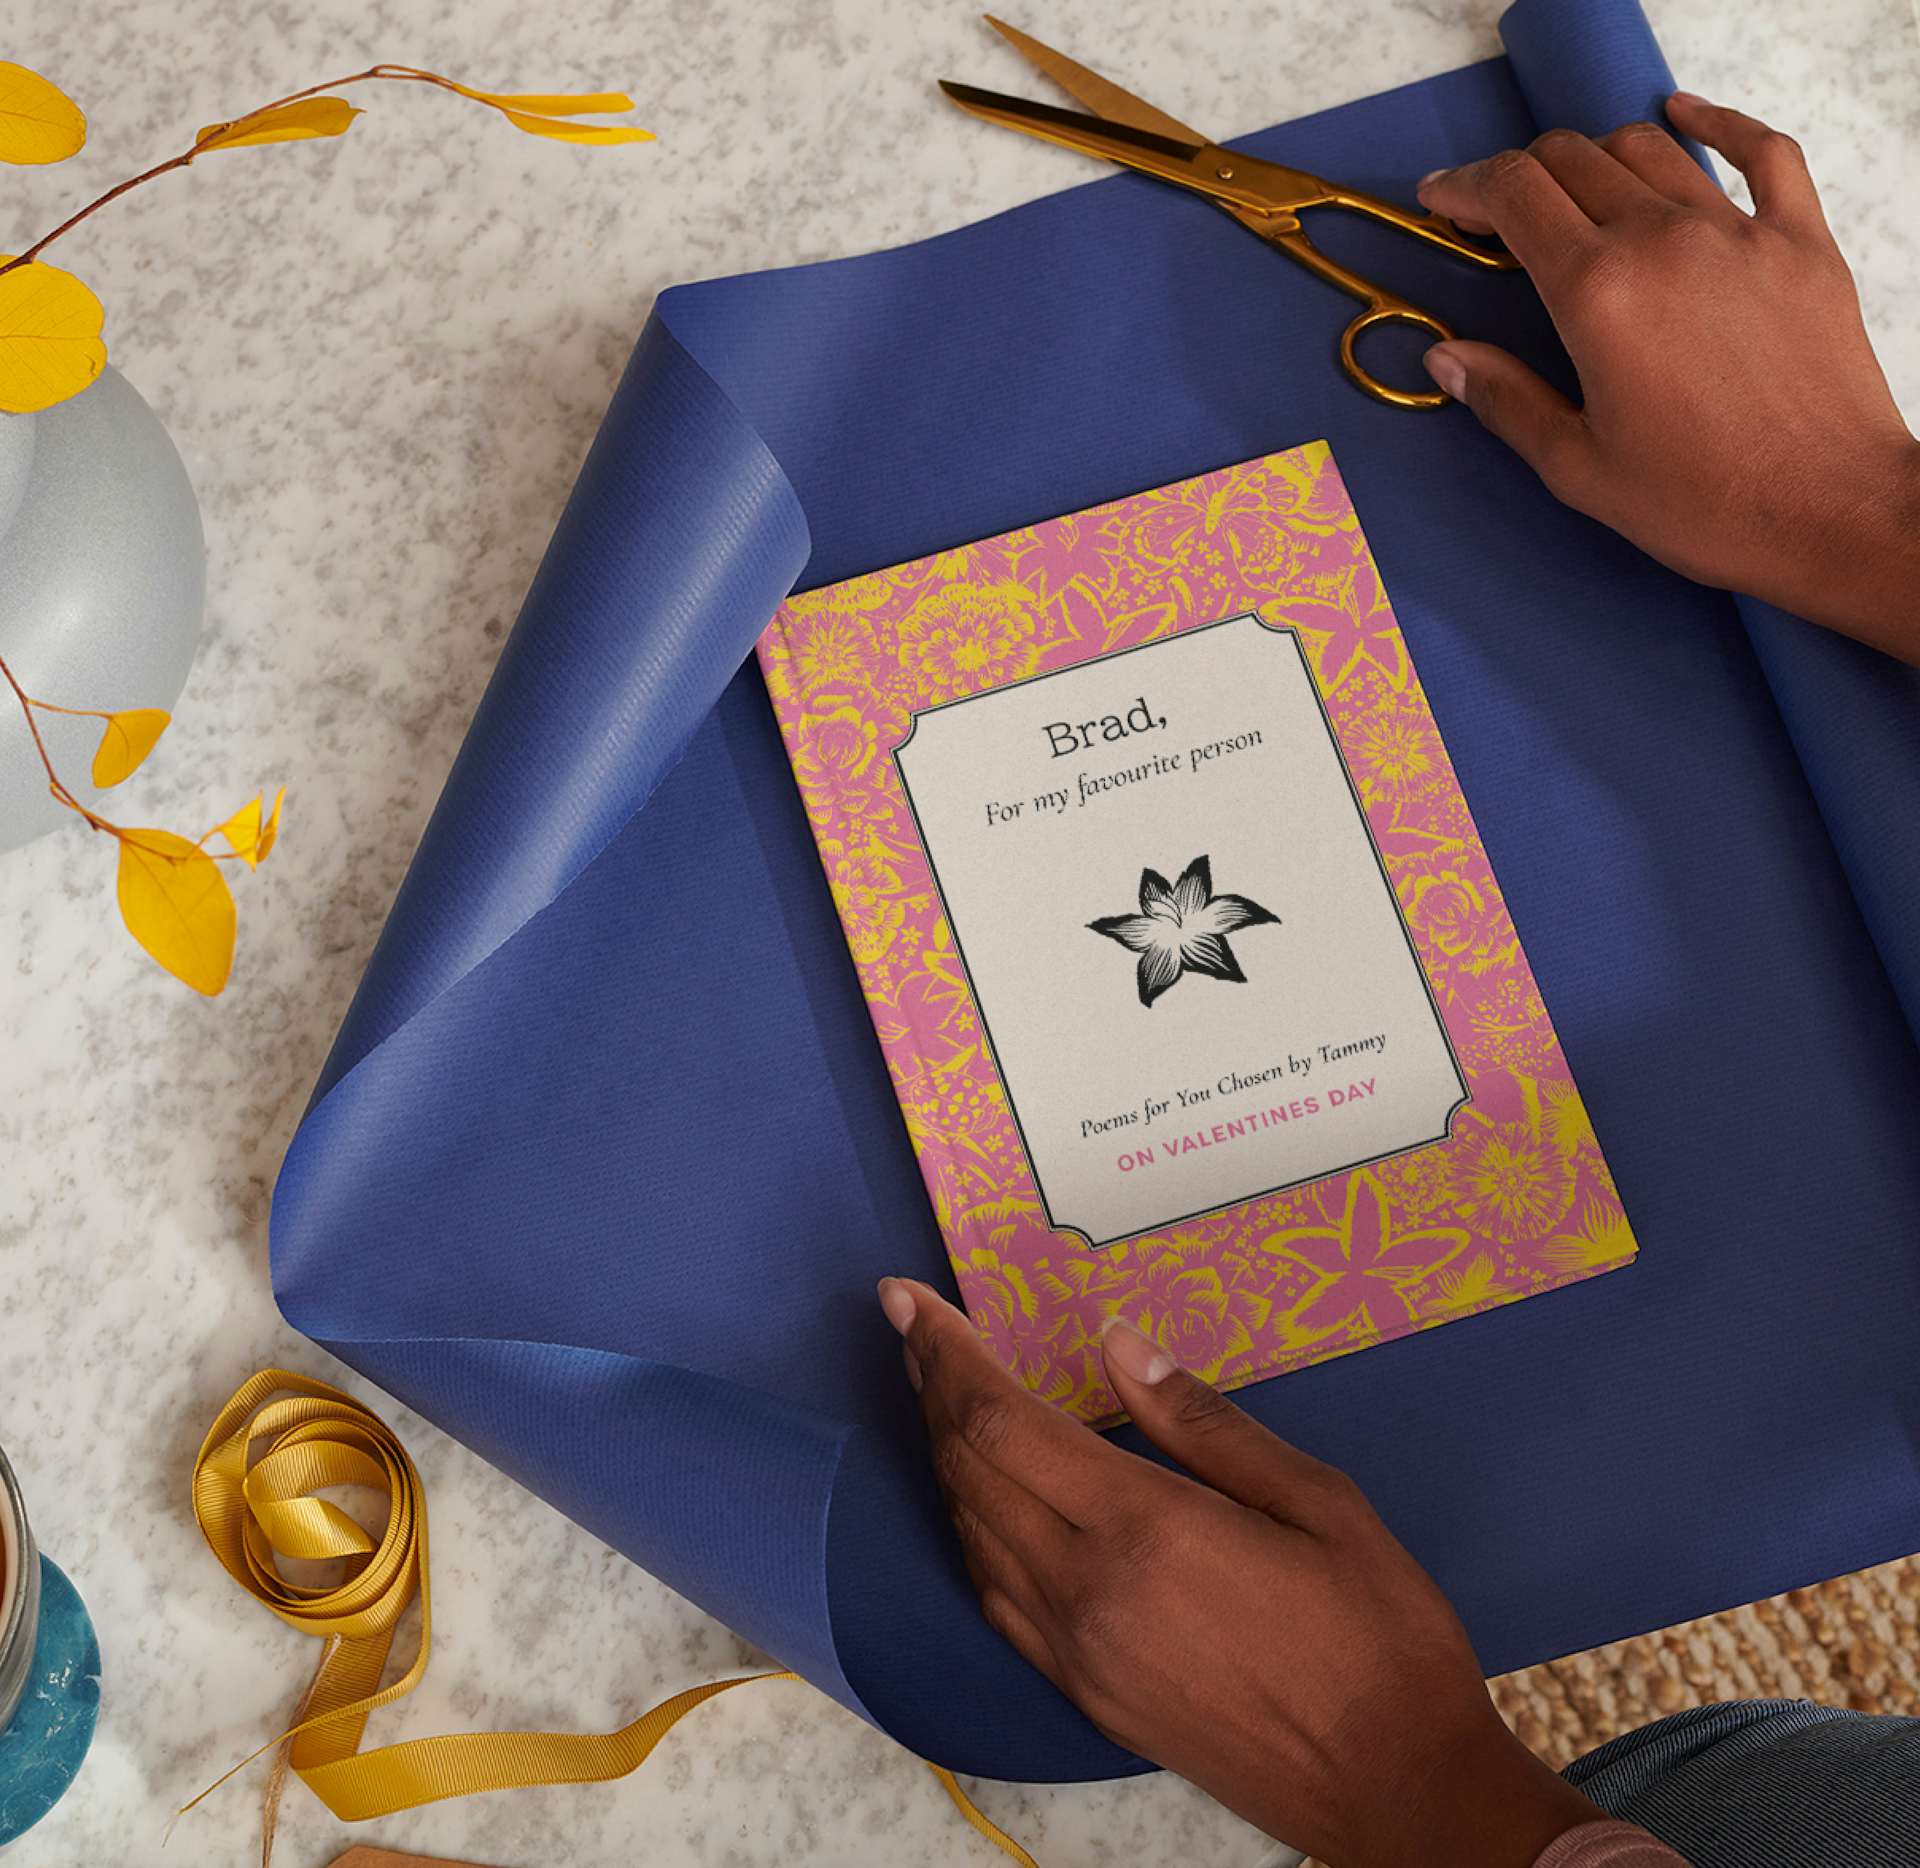 Hands wrapping a personalised book in gift wrap